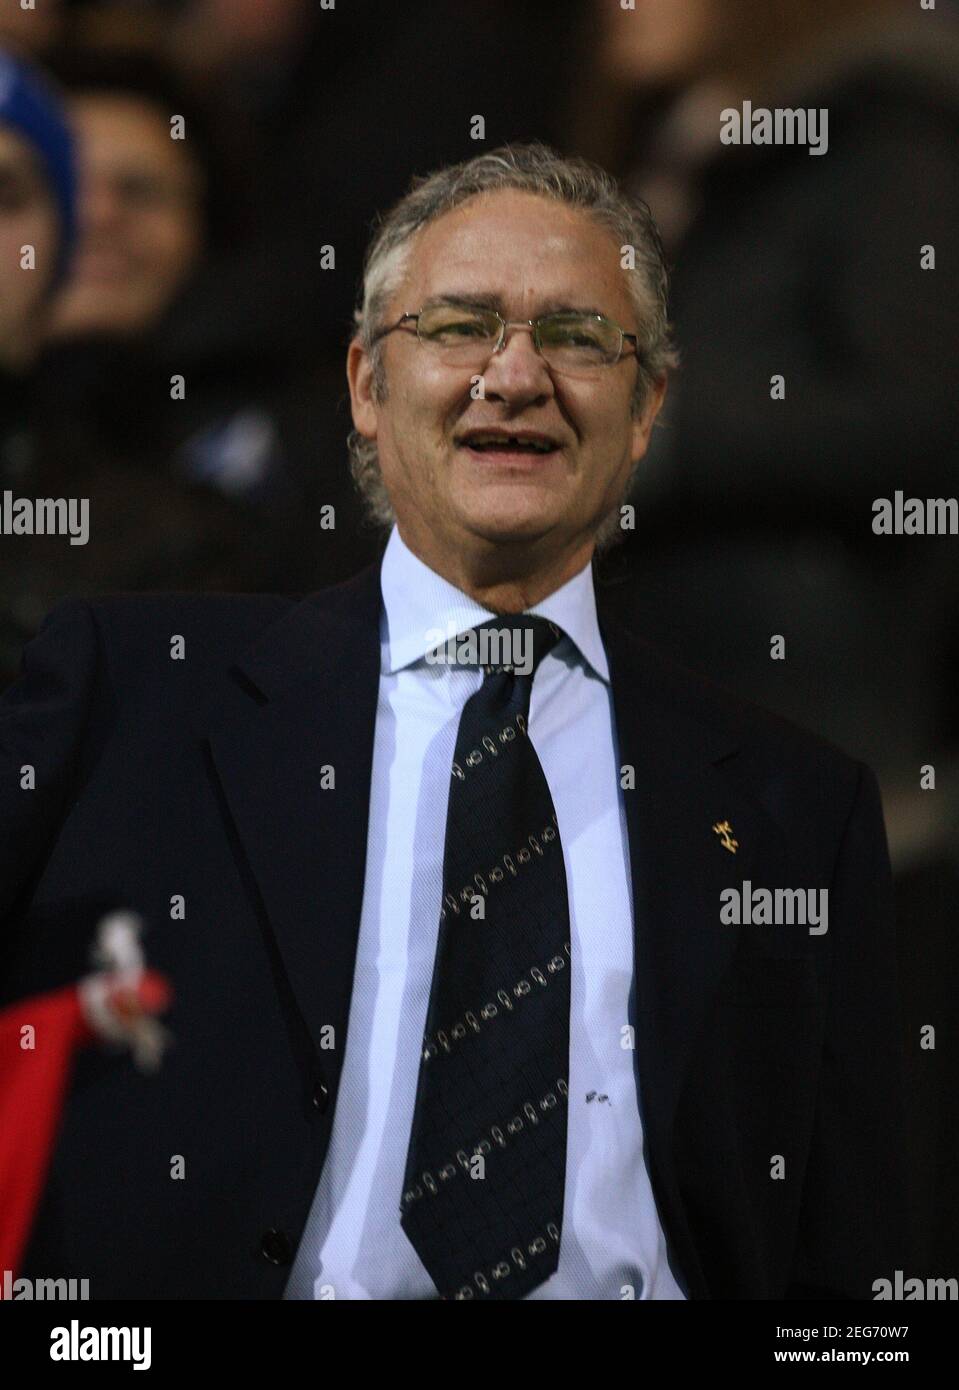 Football - Queens Park Rangers v Sheffield United - npower Football League Championship - Loftus Road - 10/11 - 4/4/11  Gianni Paladini - Queens Park Rangers FC Chairman  Mandatory Credit: Action Images / Paul Childs Stock Photo